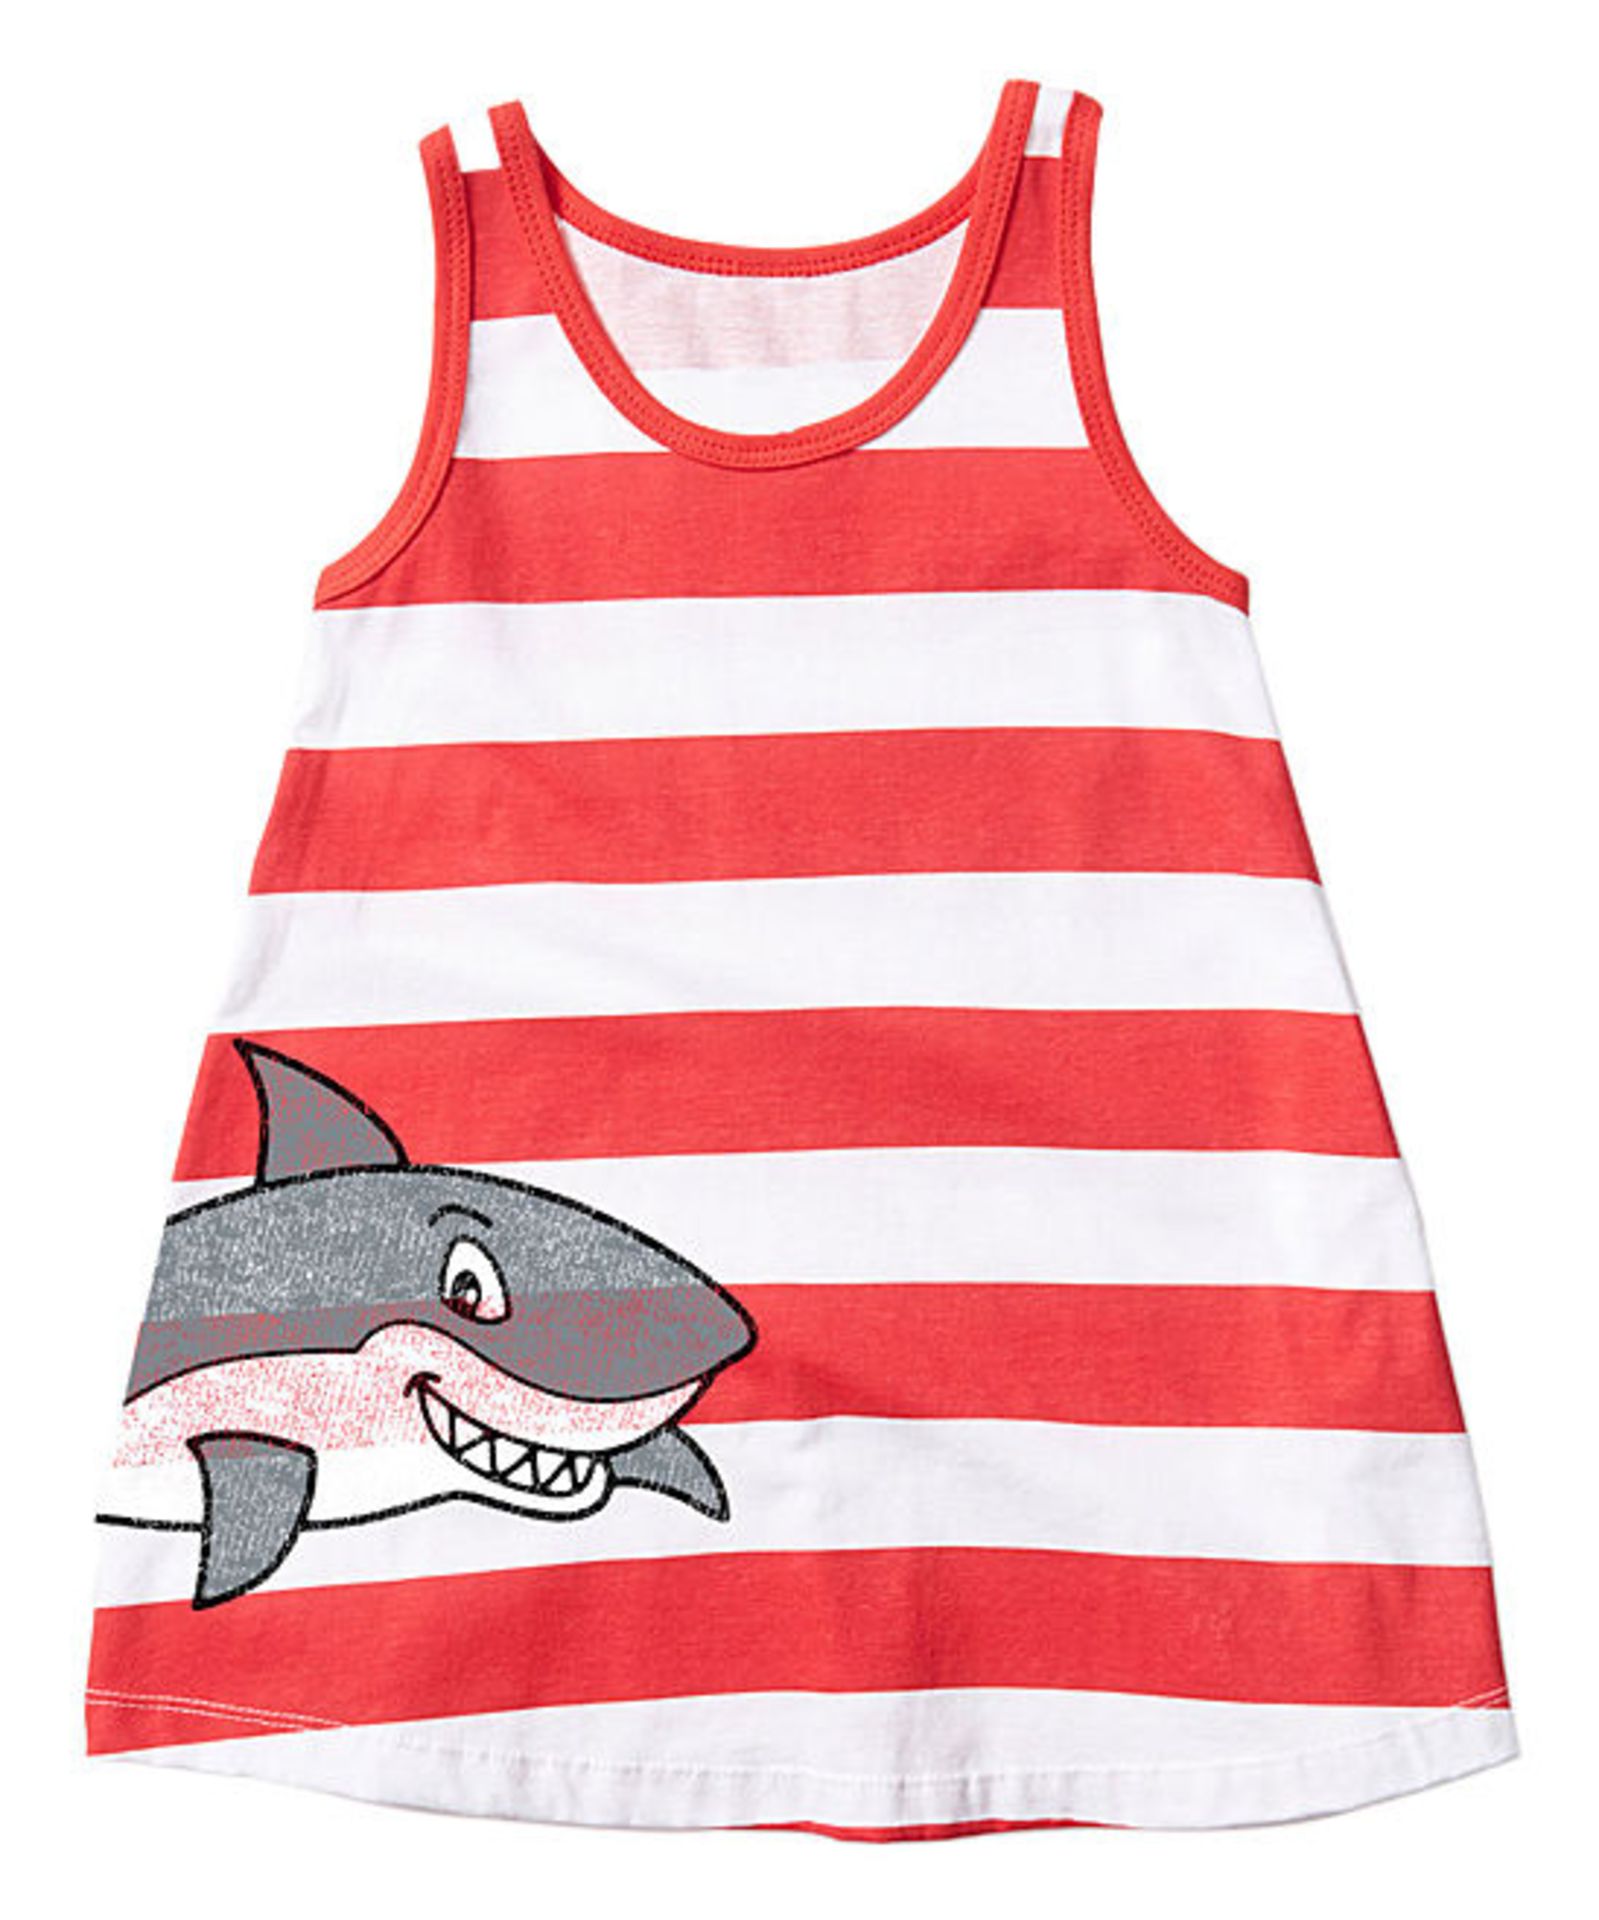 Red &White Stripe Side-Hit Shark A-Line Dress (Age 5 years) (New without tags) [Ref: 47583764- T-